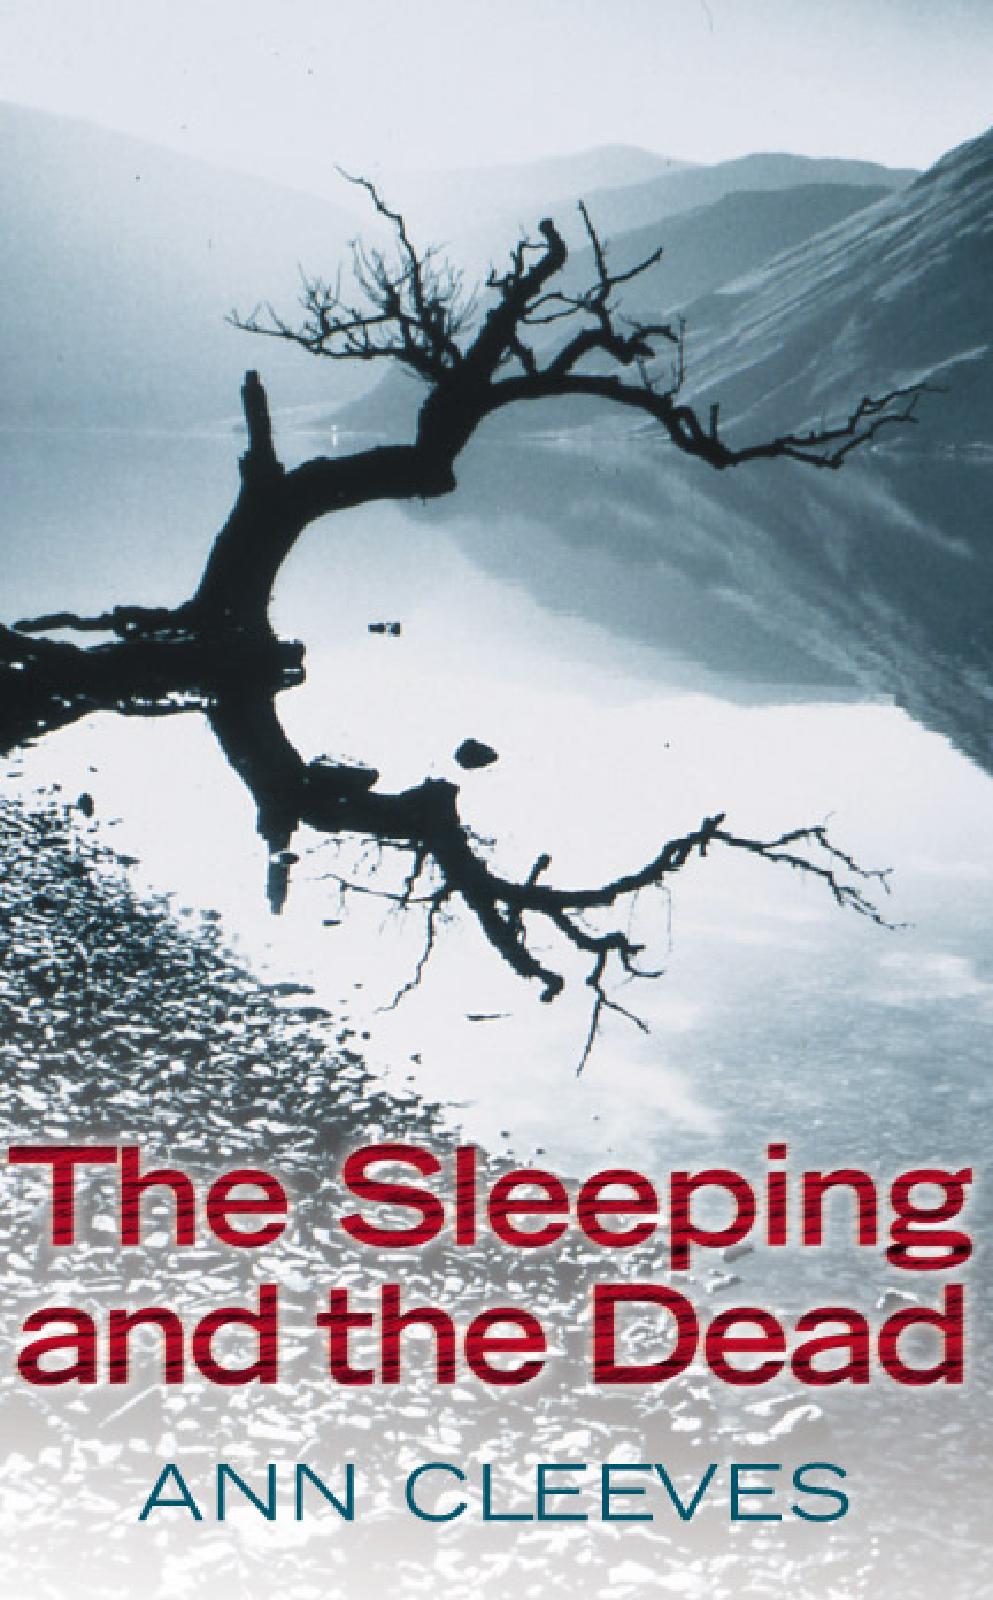 The Sleeping and the Dead by Ann Cleeves